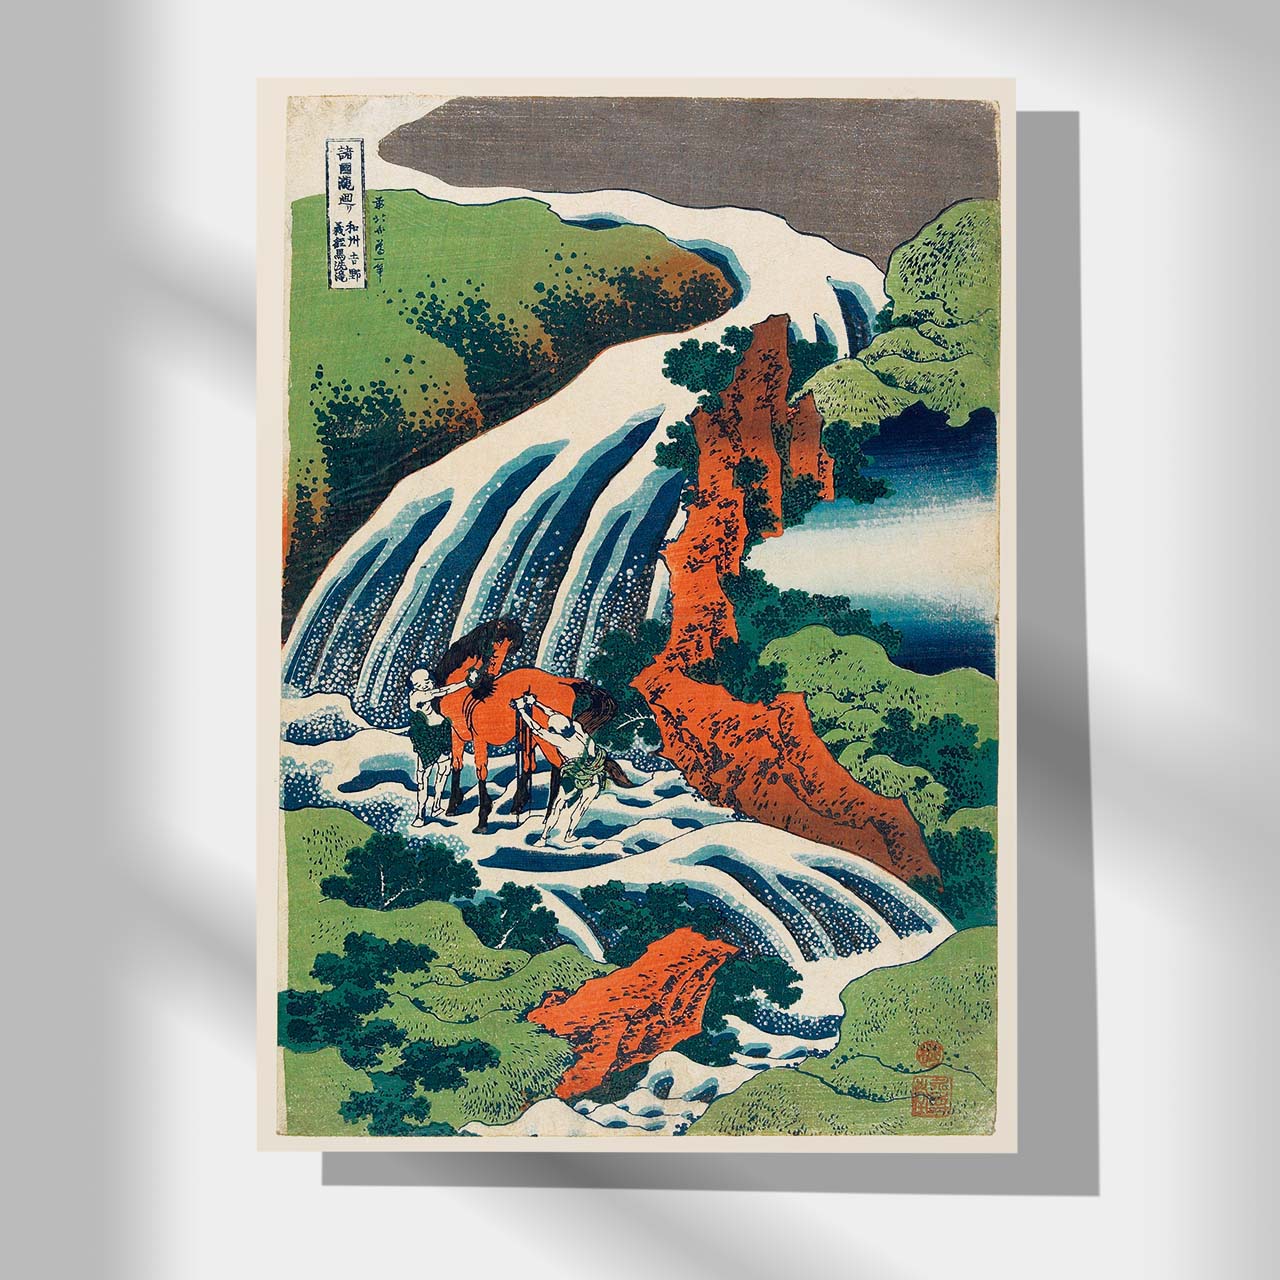 The Waterfall Where Yoshitsune Washed His Horse at Yoshino in Yamato Province - Japonica Graphic